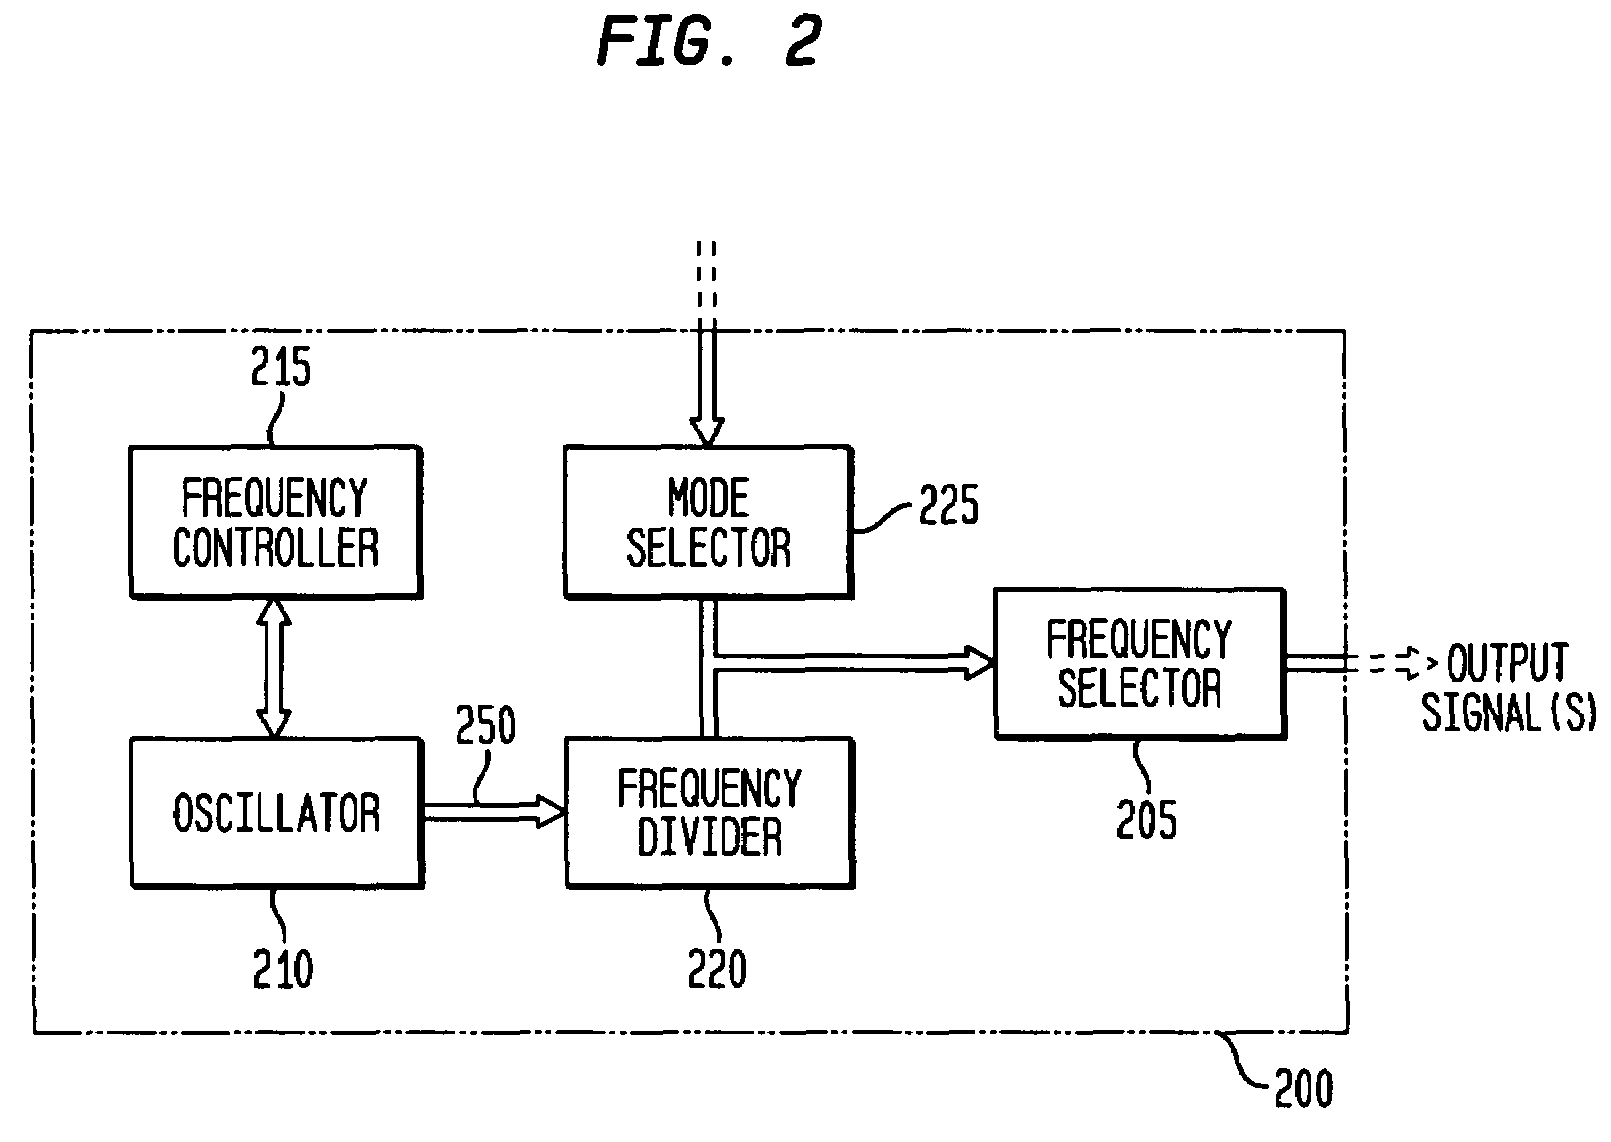 Frequency controller for a monolithic clock generator and timing/frequency reference